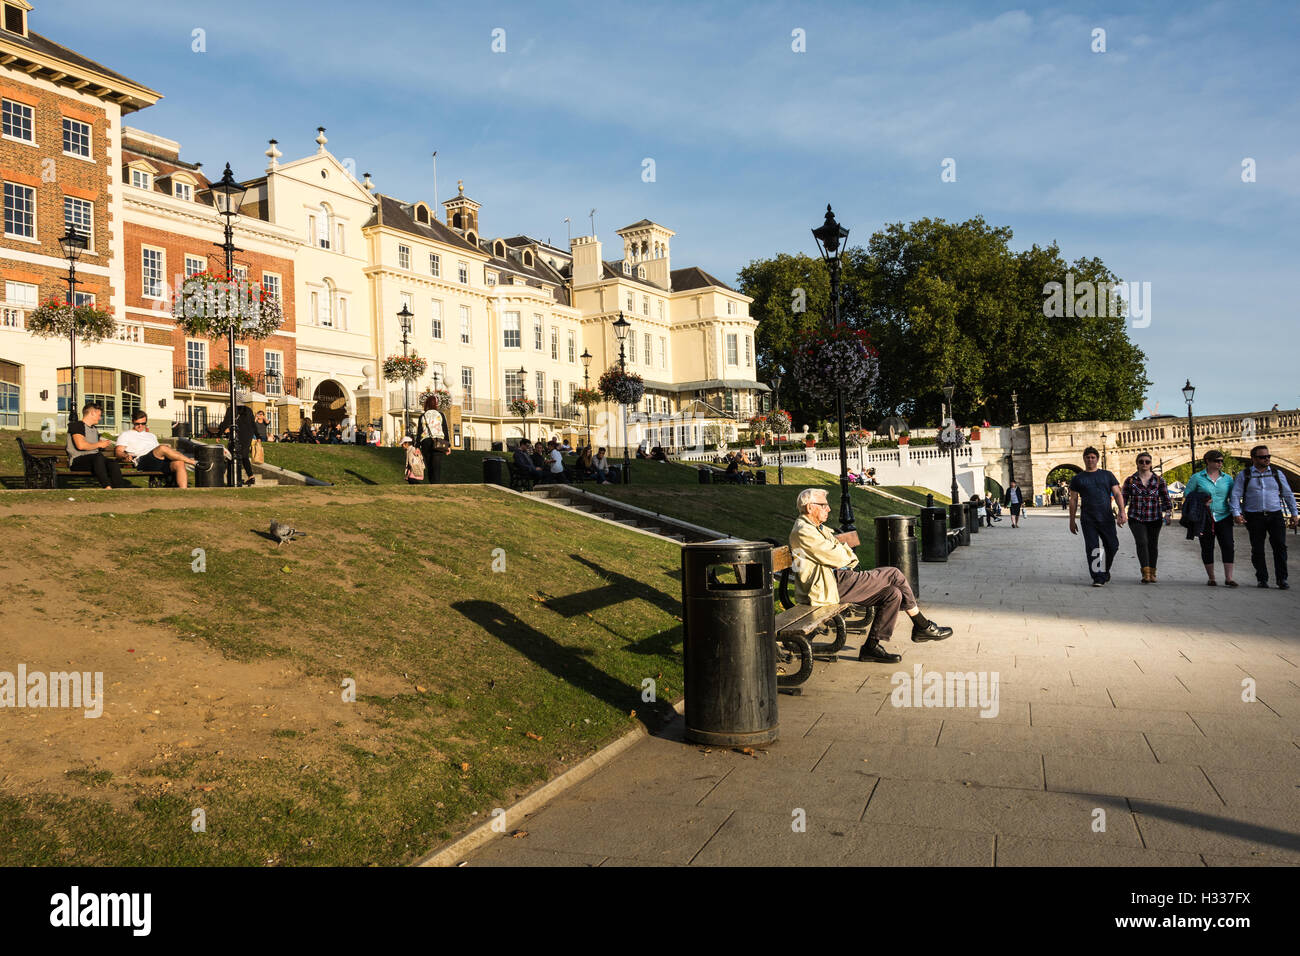 An elderly man sitting in front of exclusive riverside residential property overlooking the River Thames at Richmond Upon Thames, London, England Stock Photo